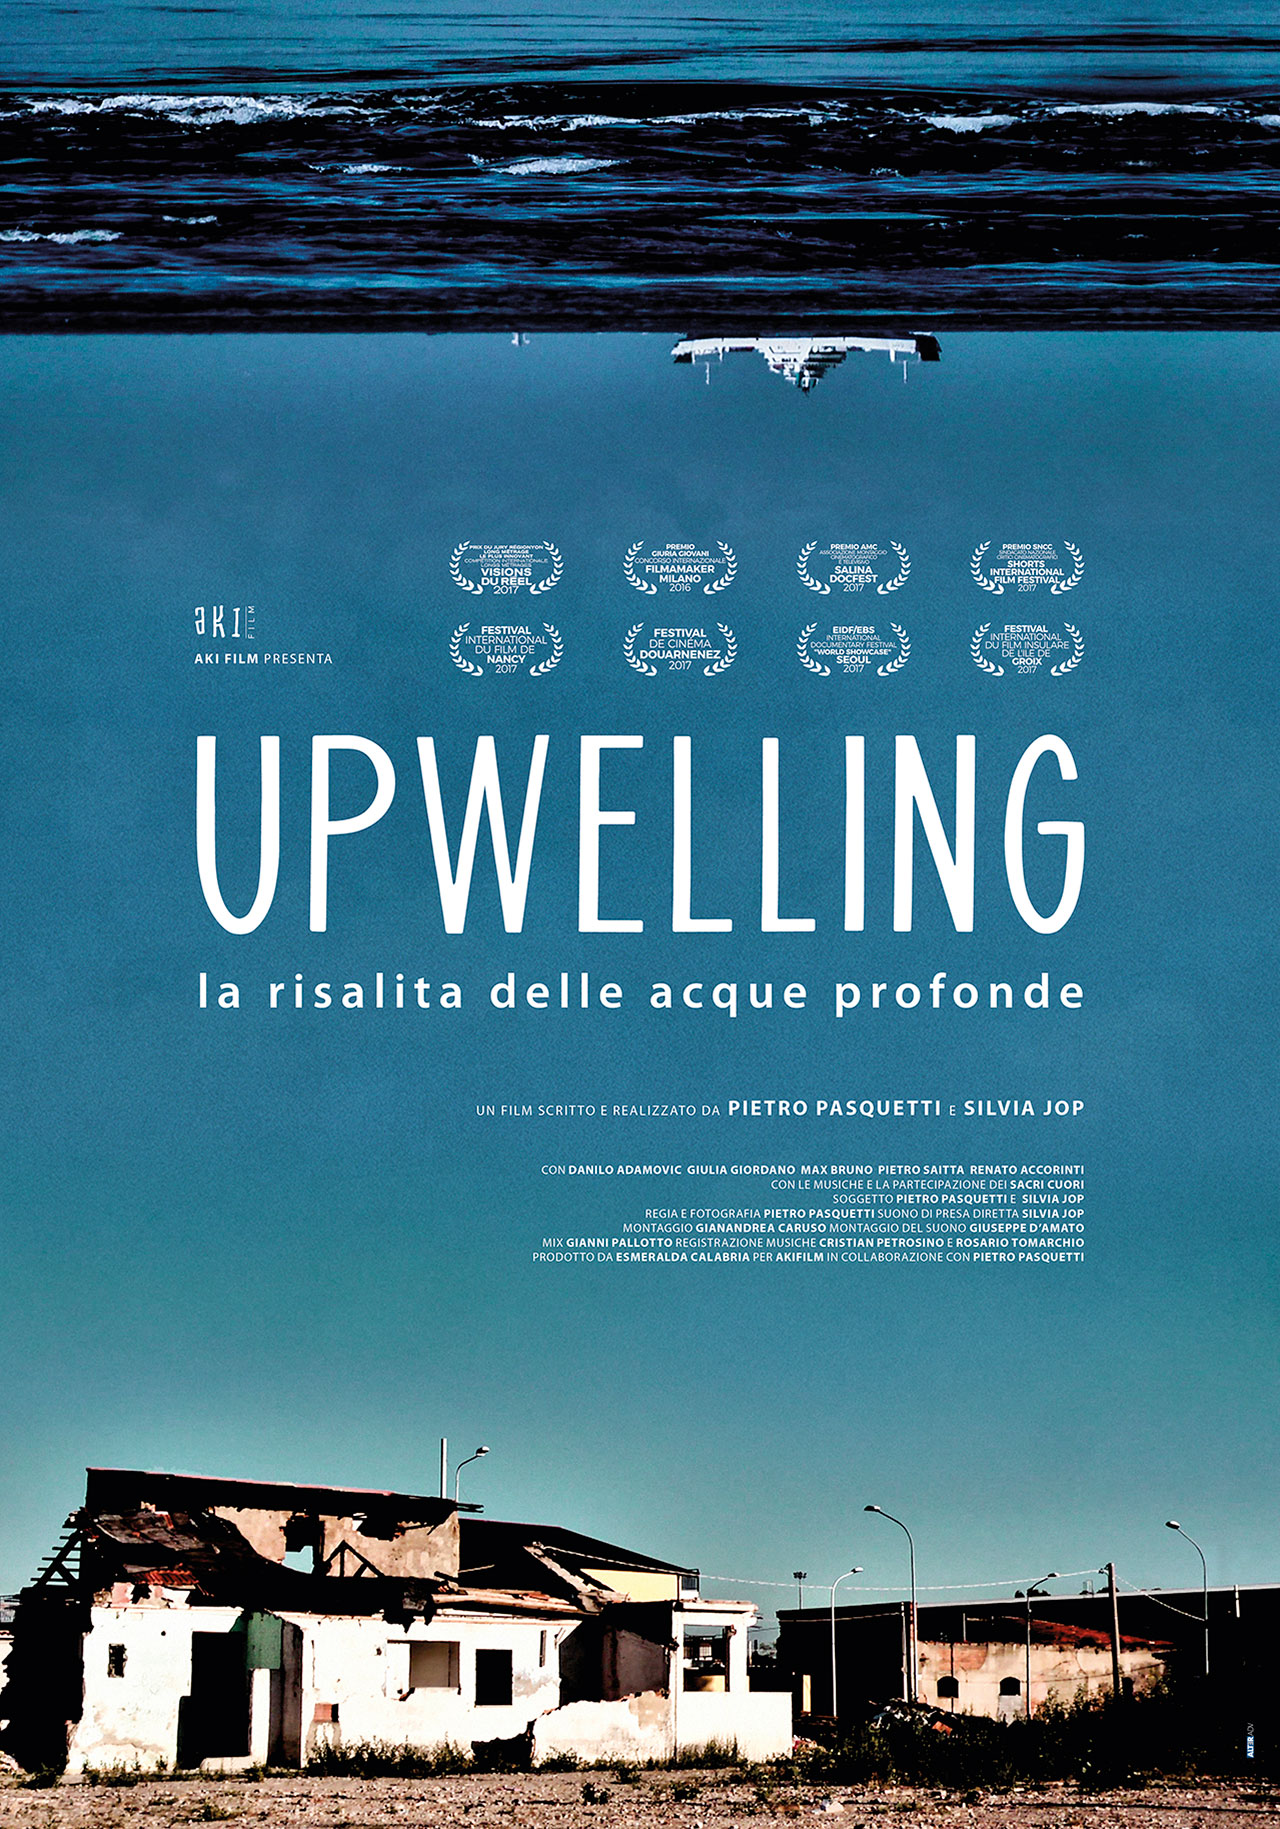 Upwelling_Poster_03_2018